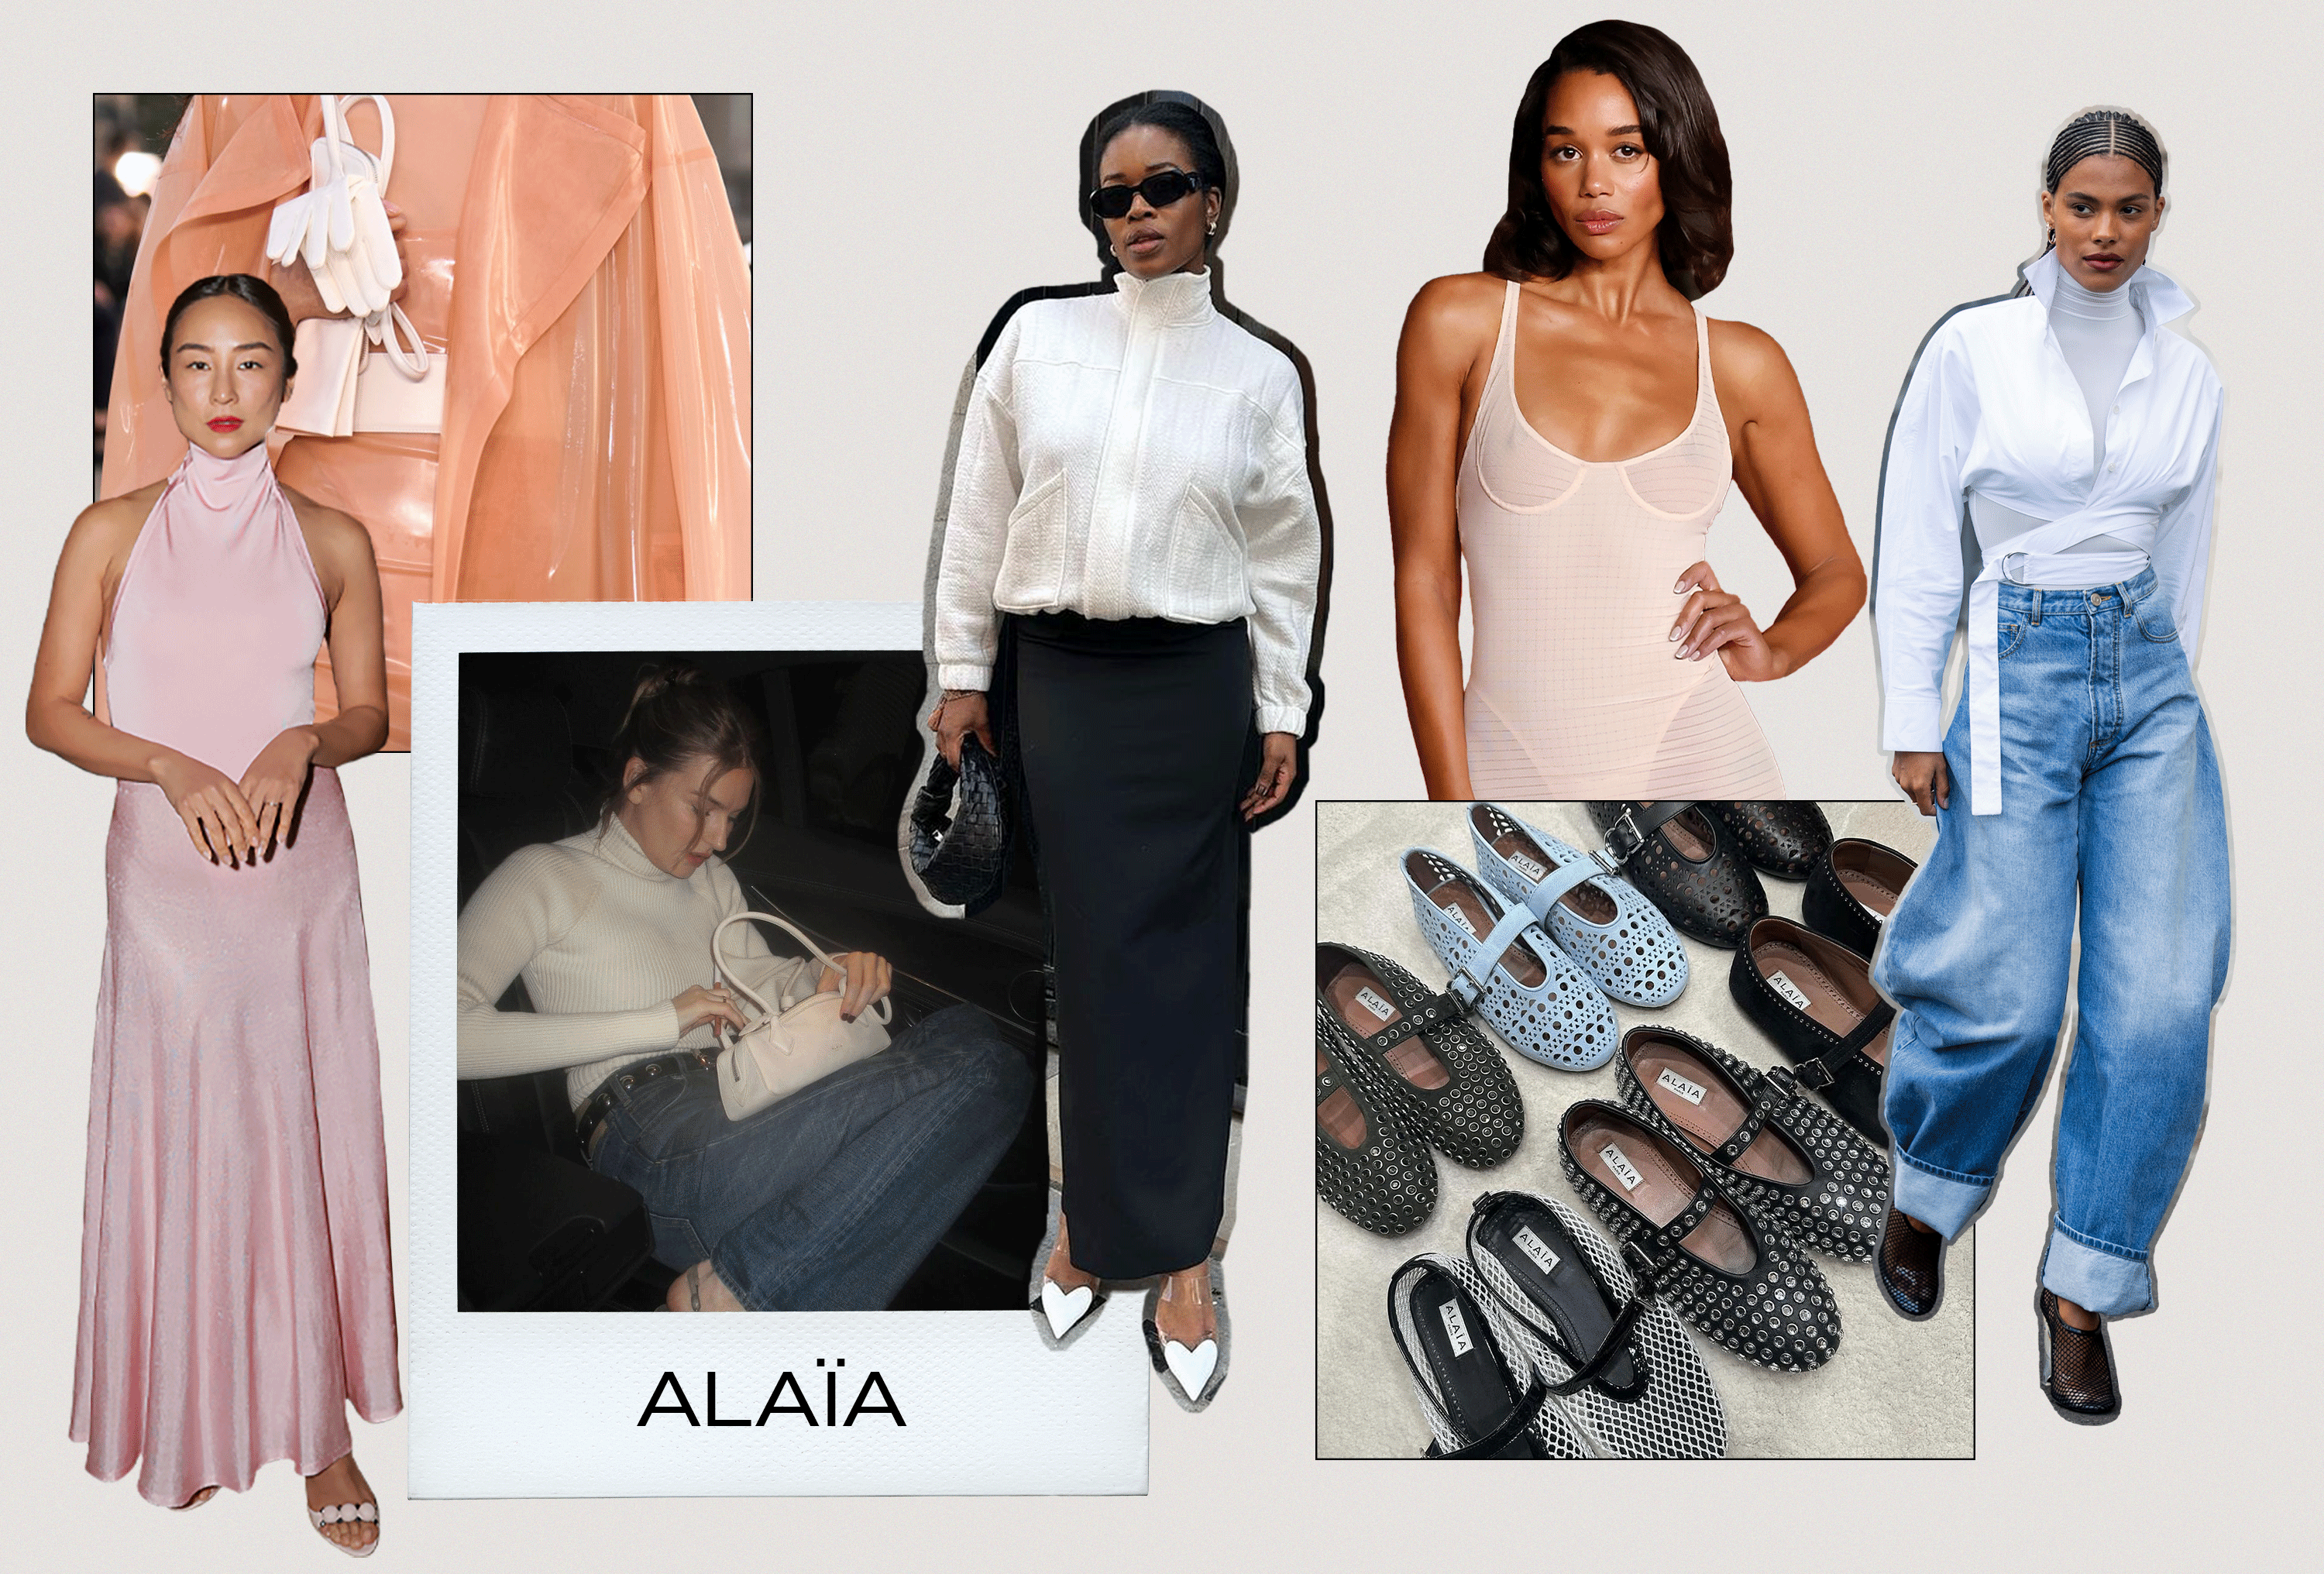 Celebrities and influencers wear clothes and accessories from Alaïa